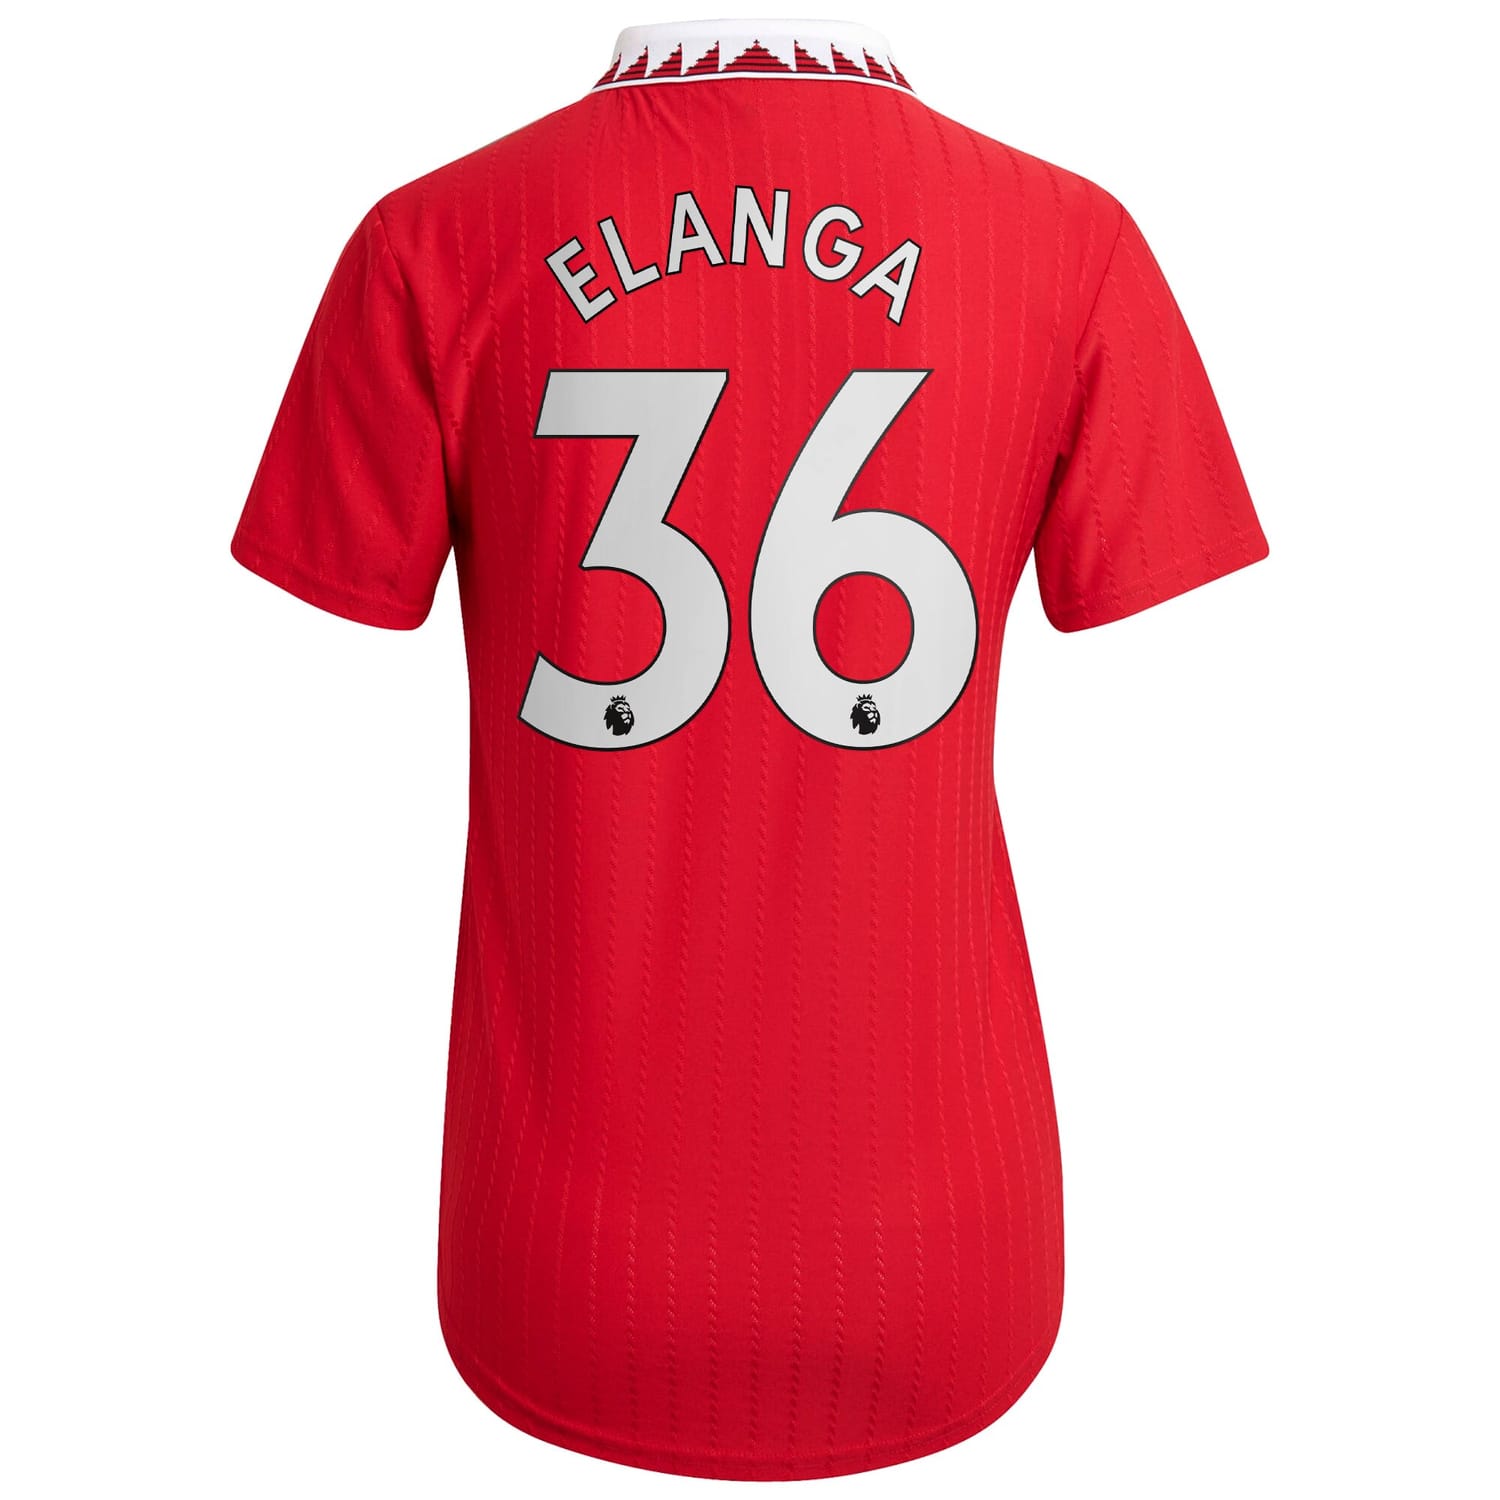 Premier League Manchester United Home Authentic Jersey Shirt 2022-23 player Anthony Elanga 36 printing for Women